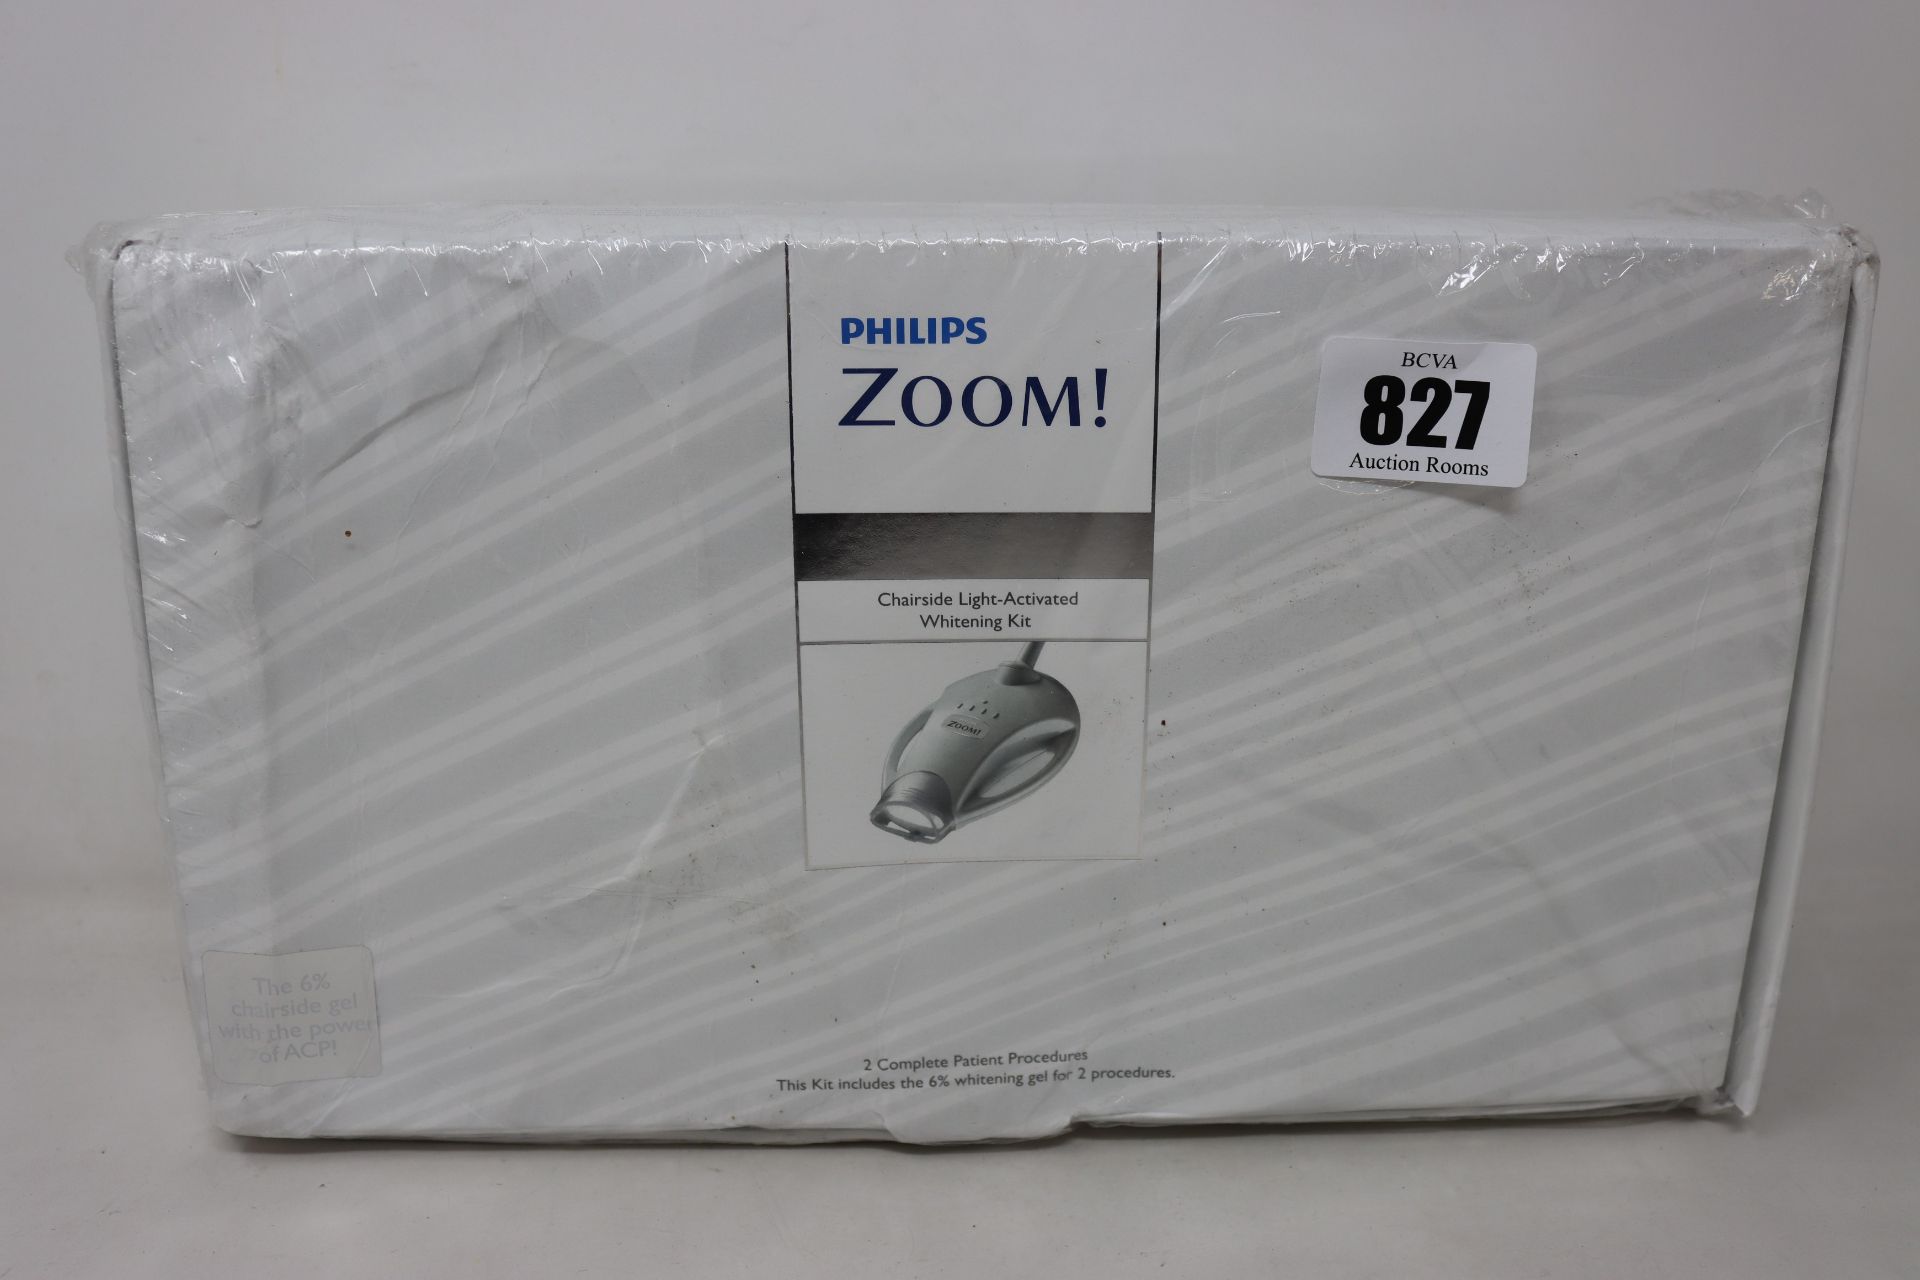 A Phillips Zoom chairside light activated whitening kit 2 complete patient procedures the kit